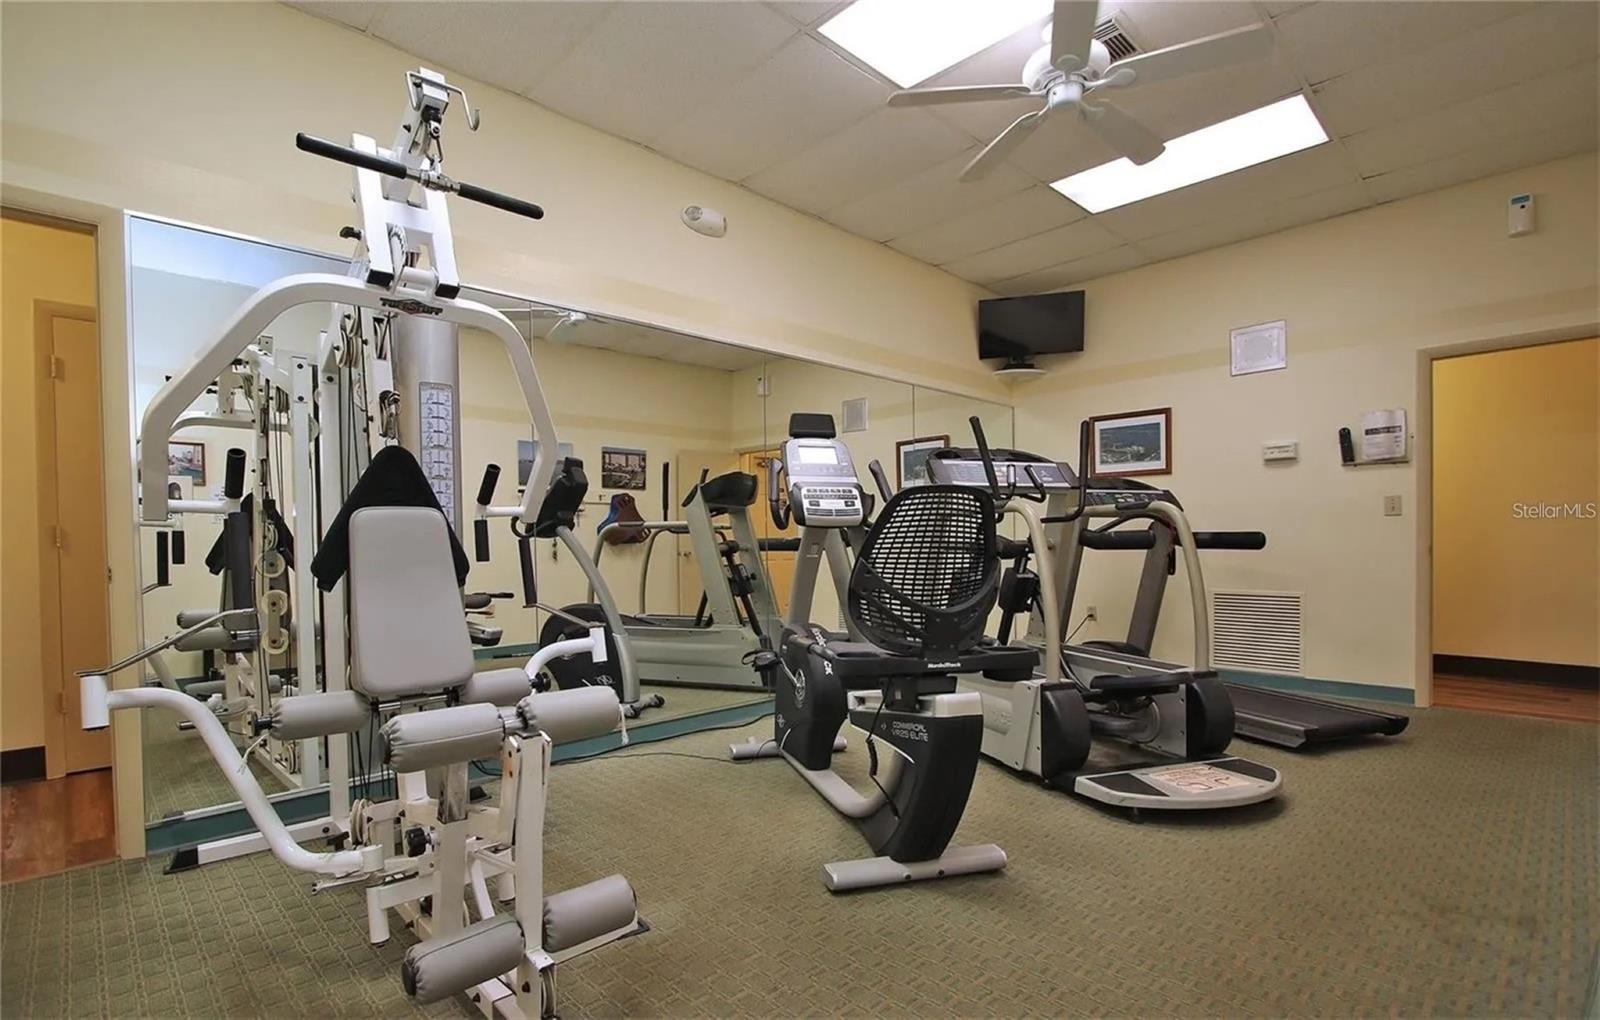 Exercise room & a sauna to use.